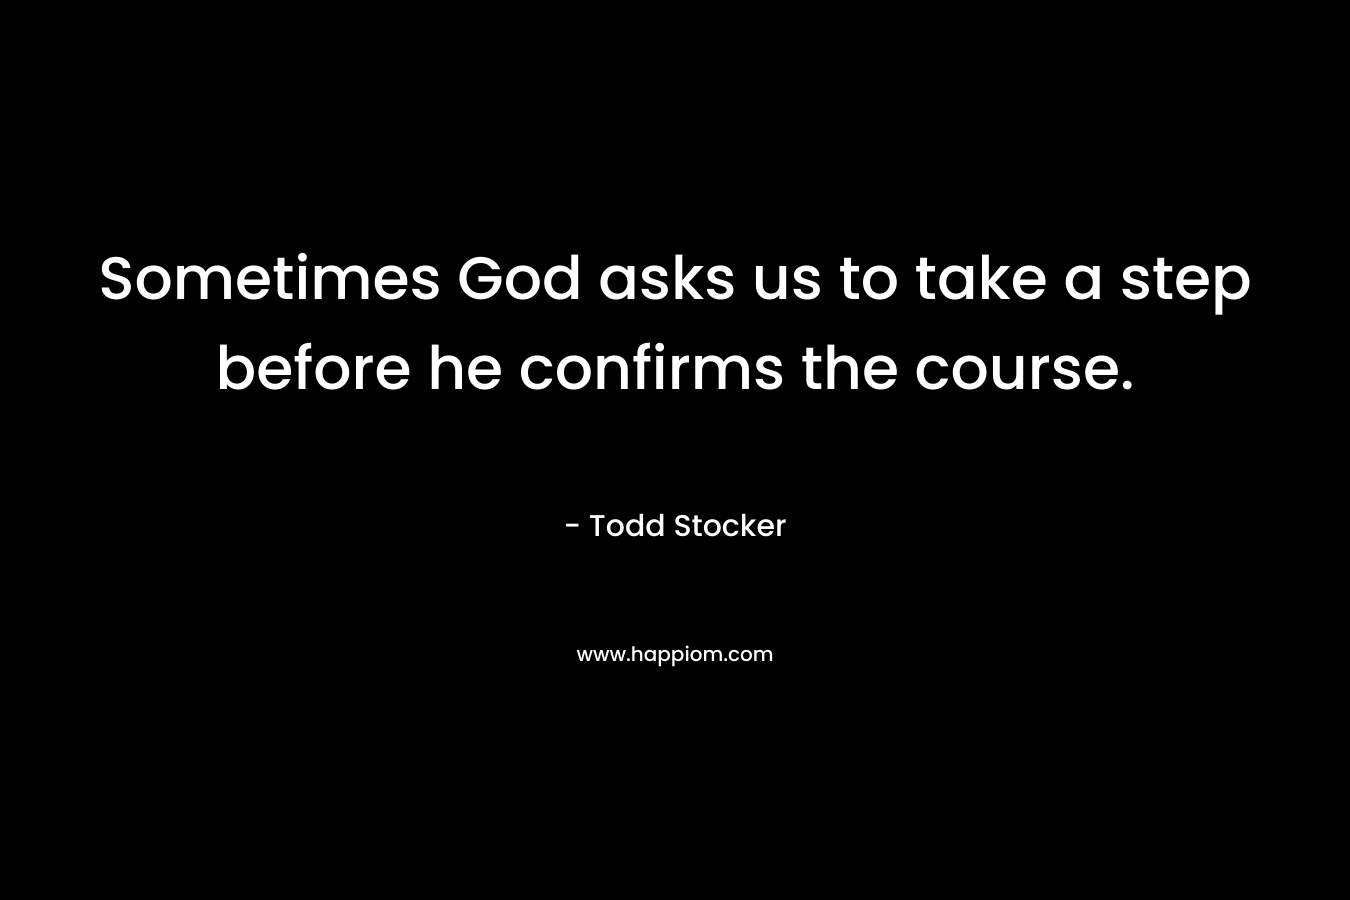 Sometimes God asks us to take a step before he confirms the course.